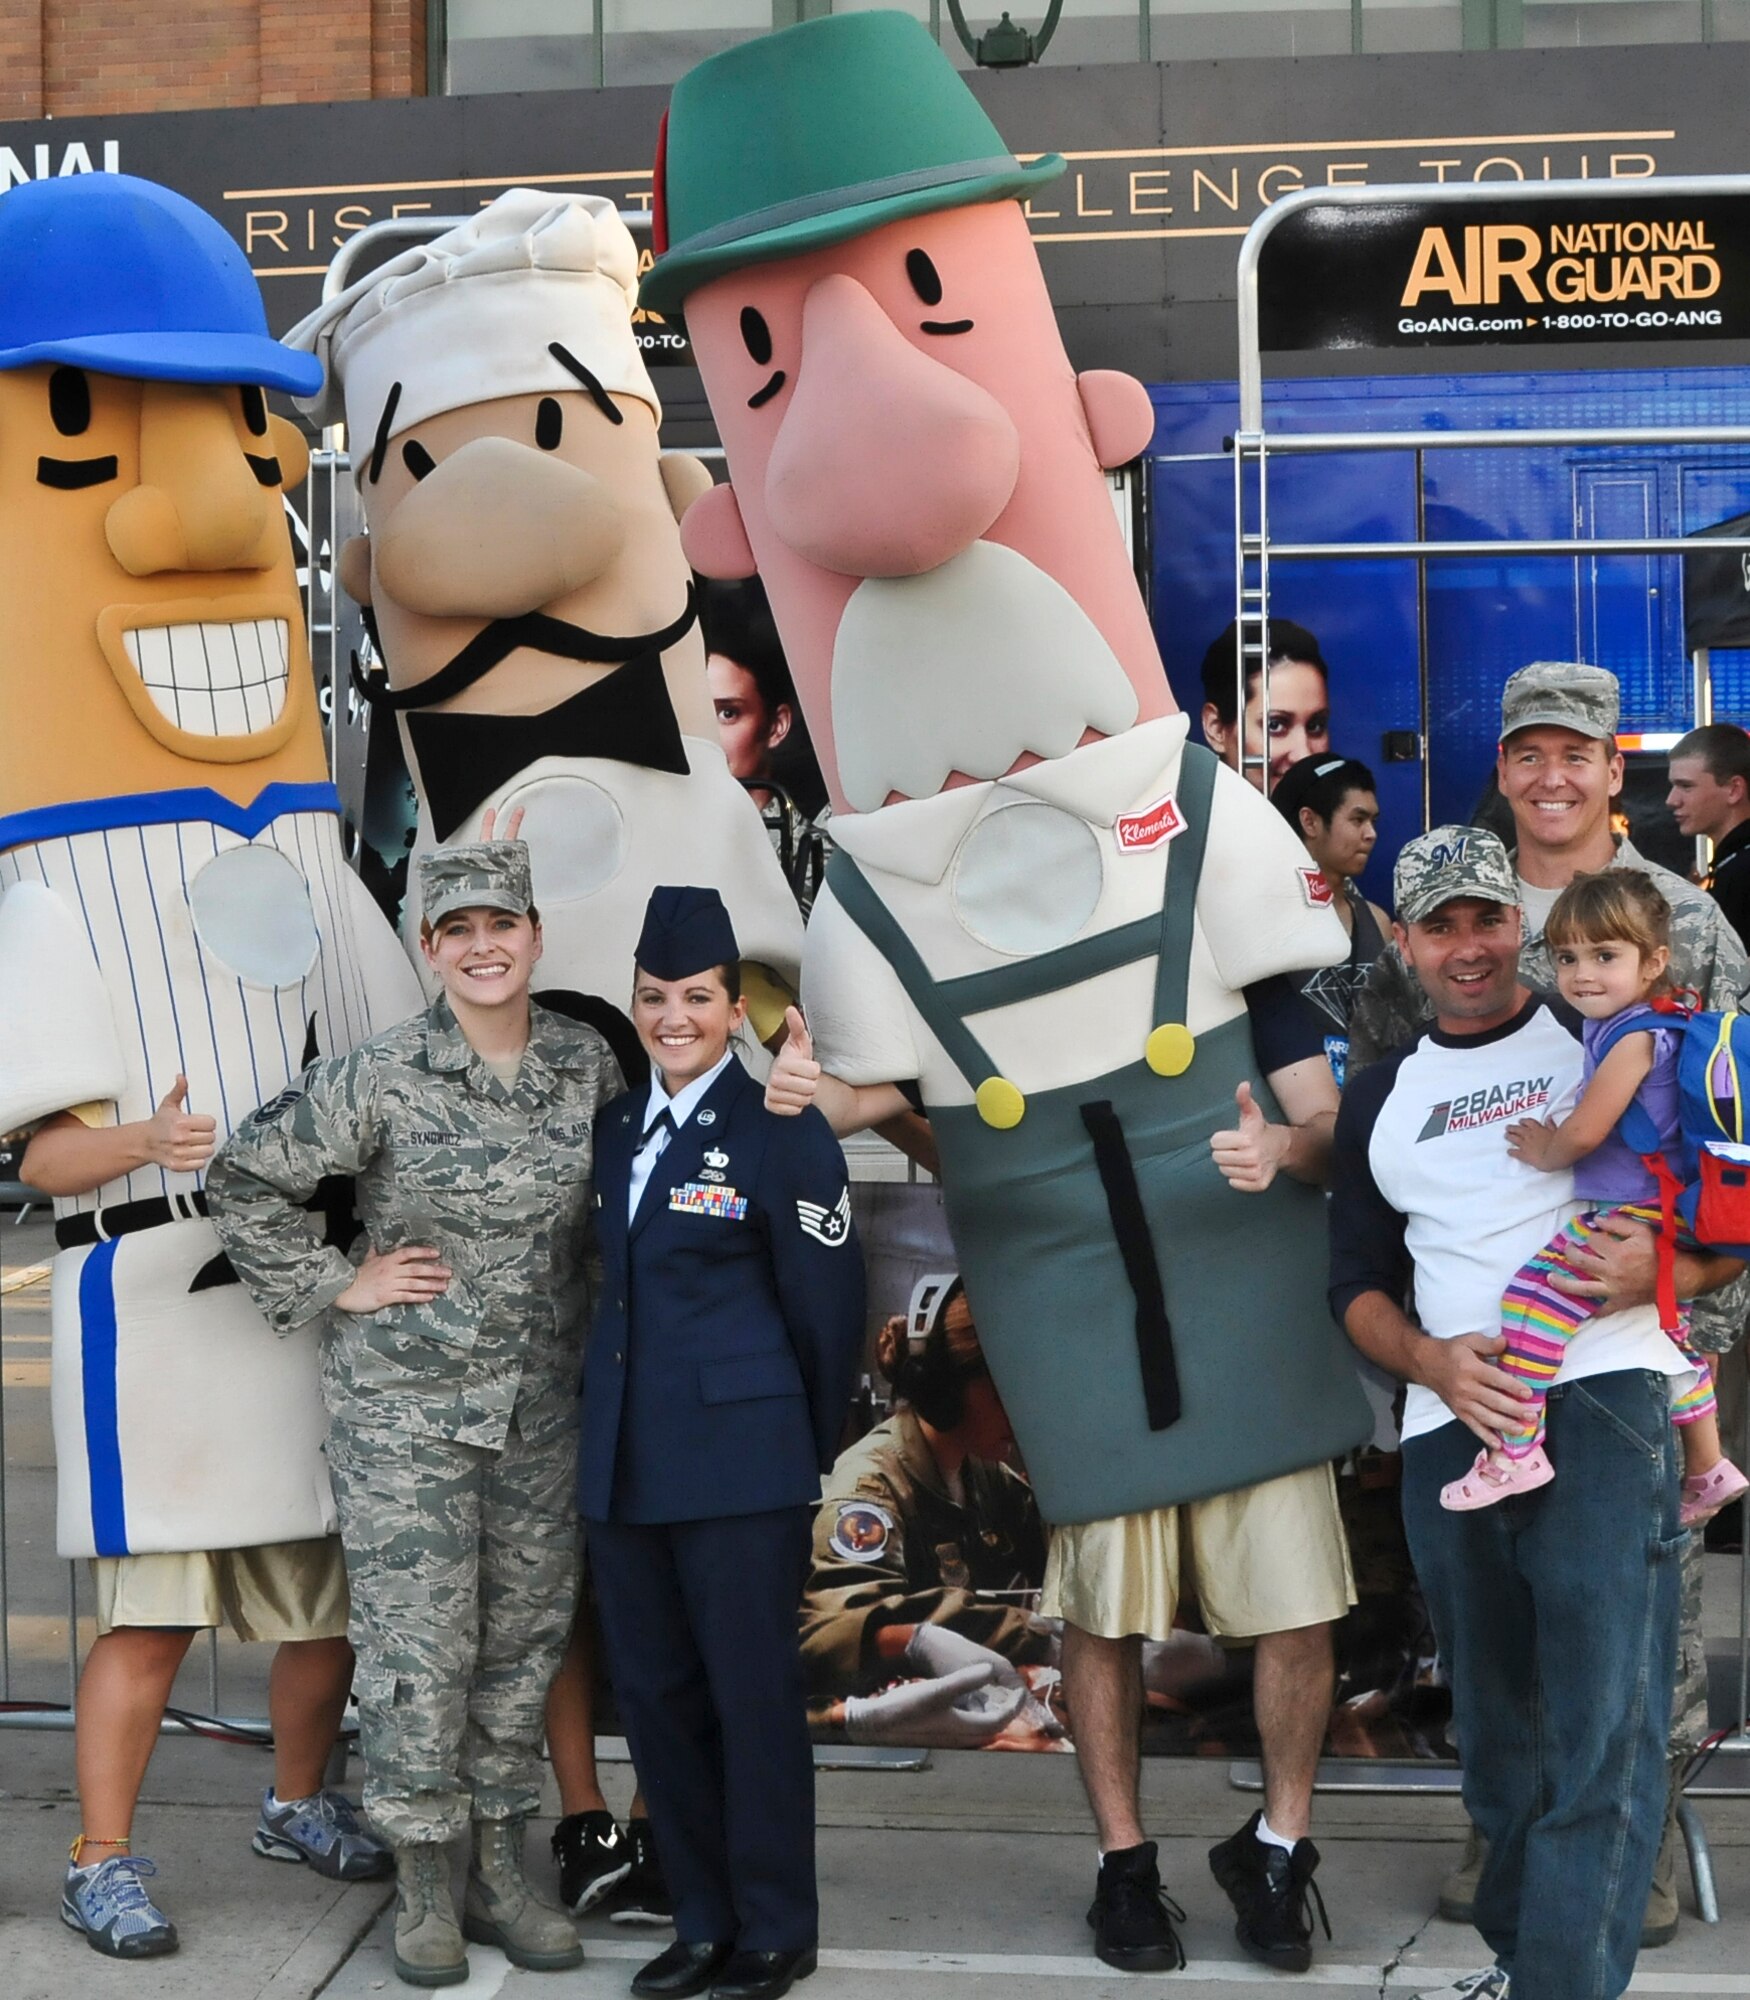 (Left to Right) Master Sgt. Nikki Synowicz, Staff Sgt. Leah Rogers, Tech. Sgt. Chris Rogers (in civilian clothes, holding child) and Master Sgt. Robert Van Lanen meet the Milwaukee Brewers’ Famous Racing Sausages at the Air National Guard’s recruiting booth at Miller Park in Milwaukee Wed., Sept. 12, 2012.
(Air National Guard Photo by Staff Sgt. Jeremy M. Wilson / Released)
